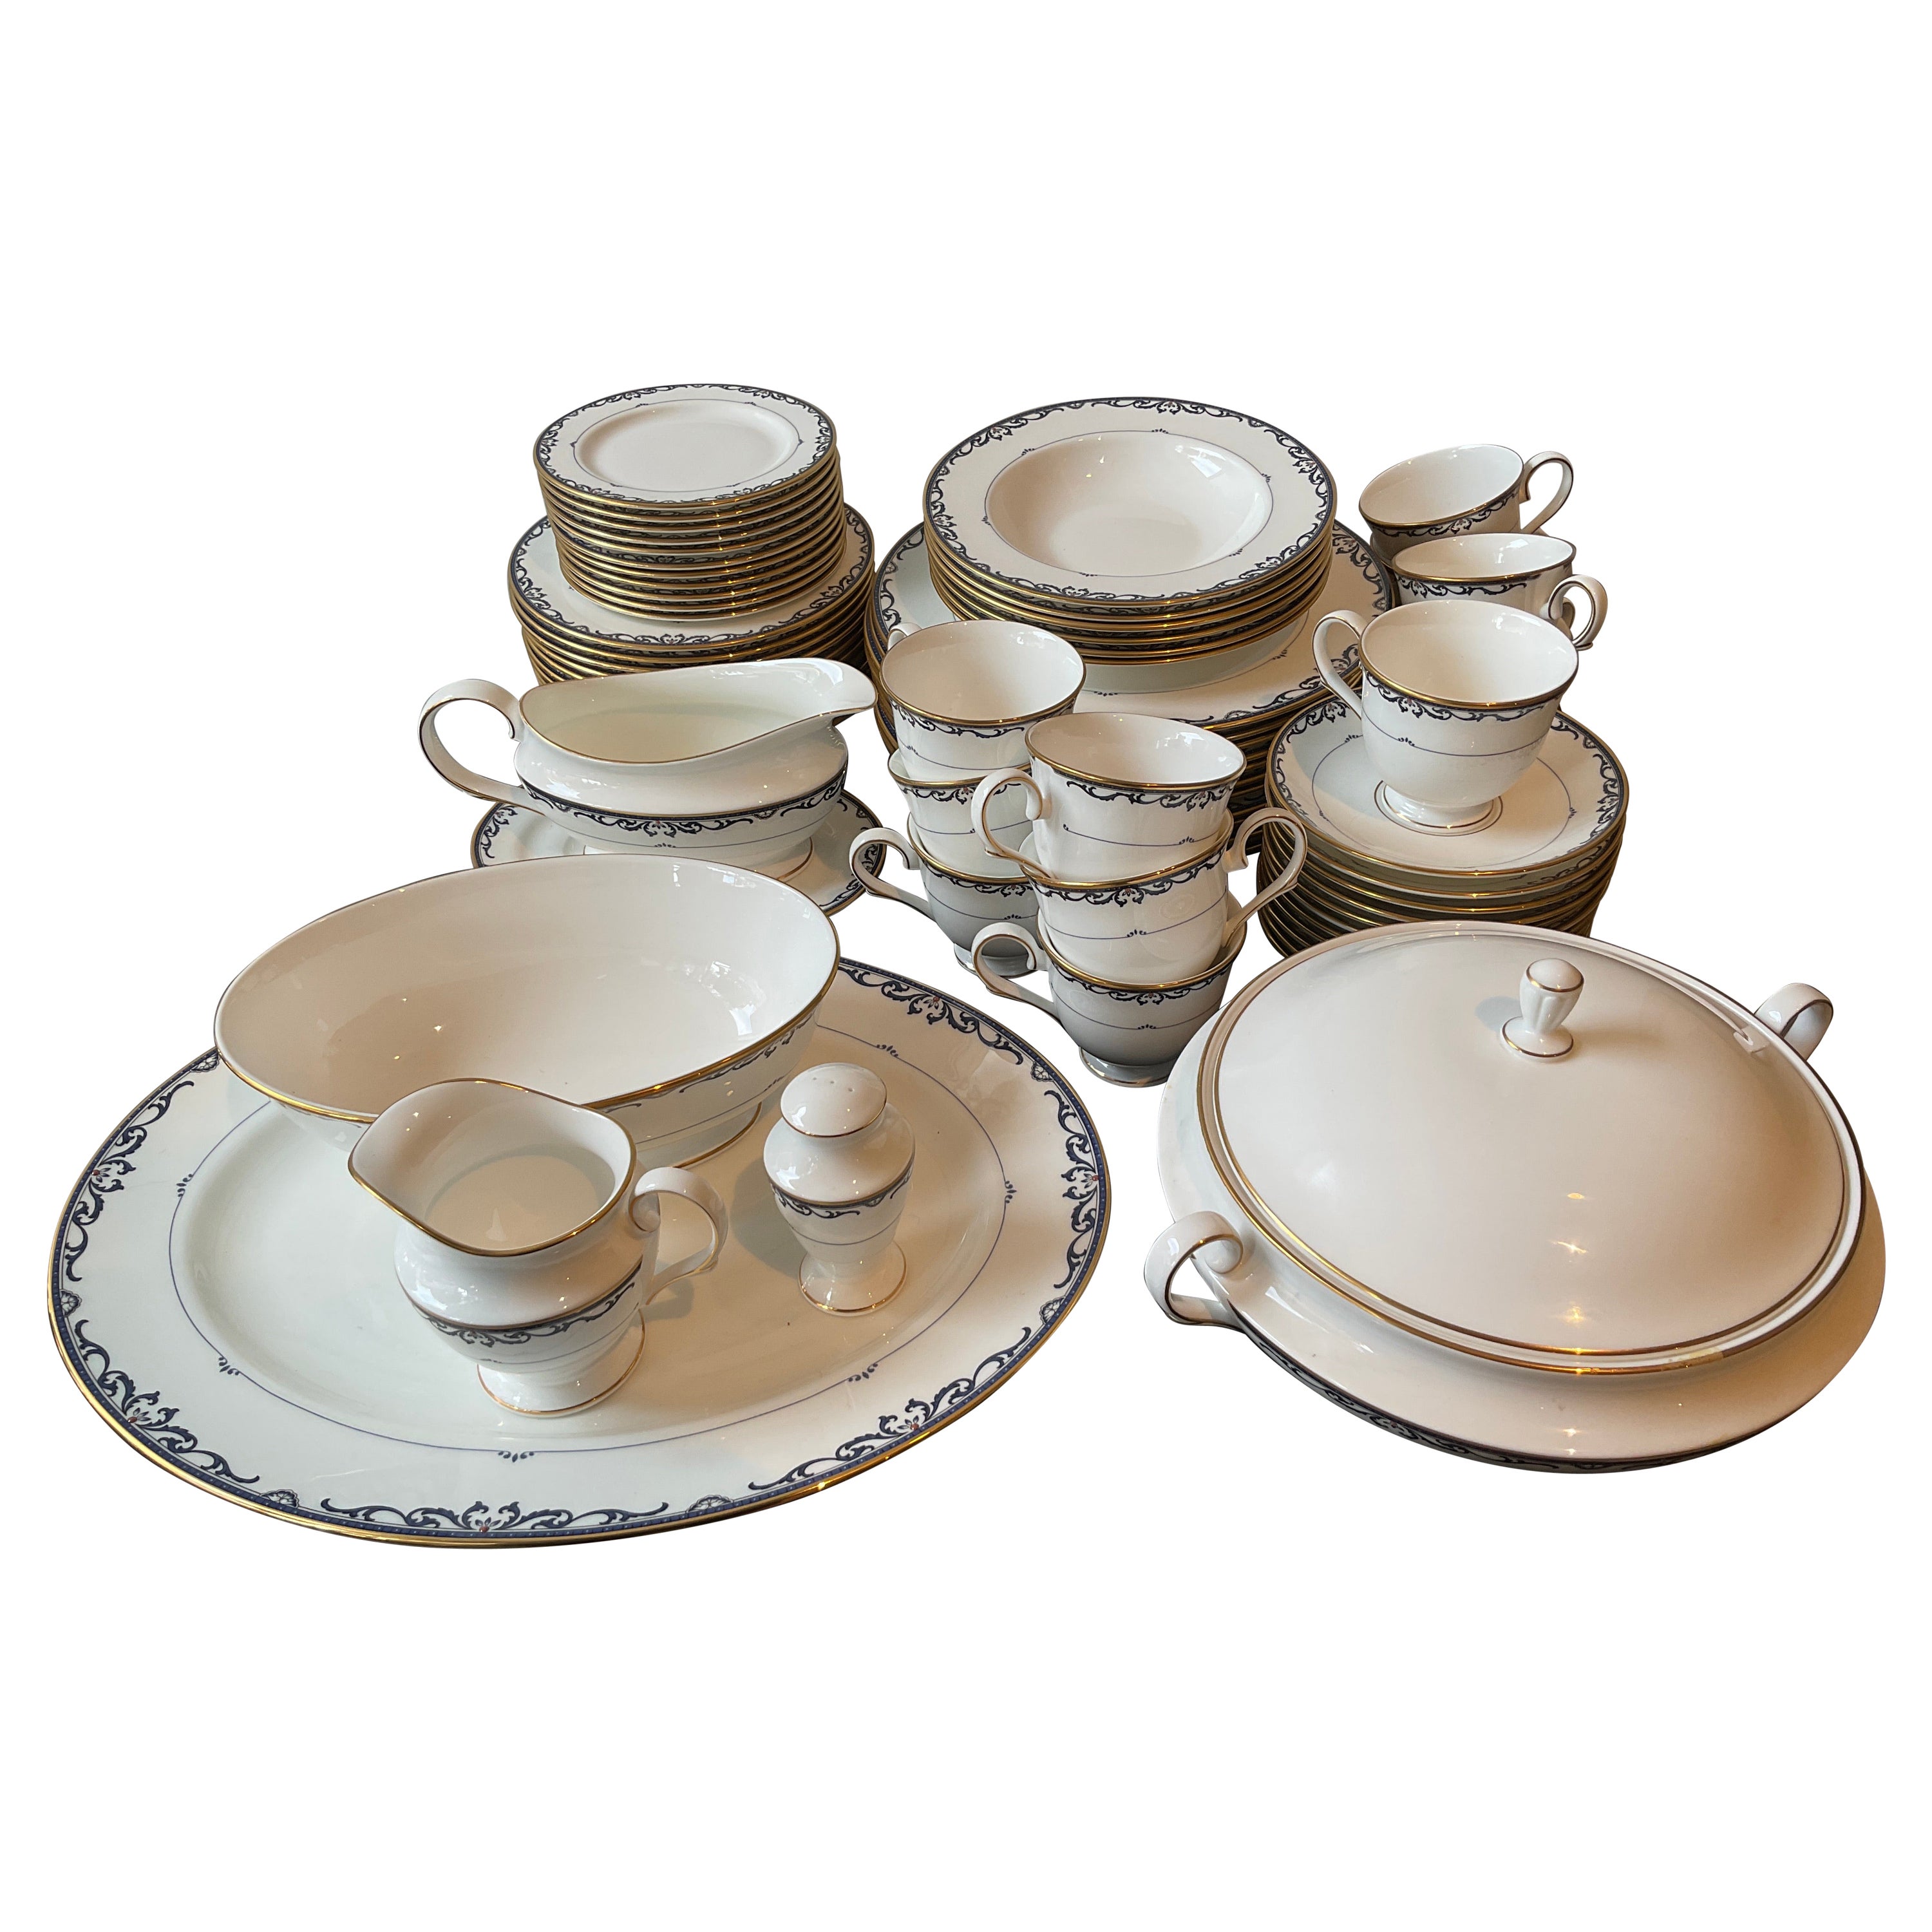 67 Pieces Of Lenox Royal Scoll Dinnerware Set For Sale